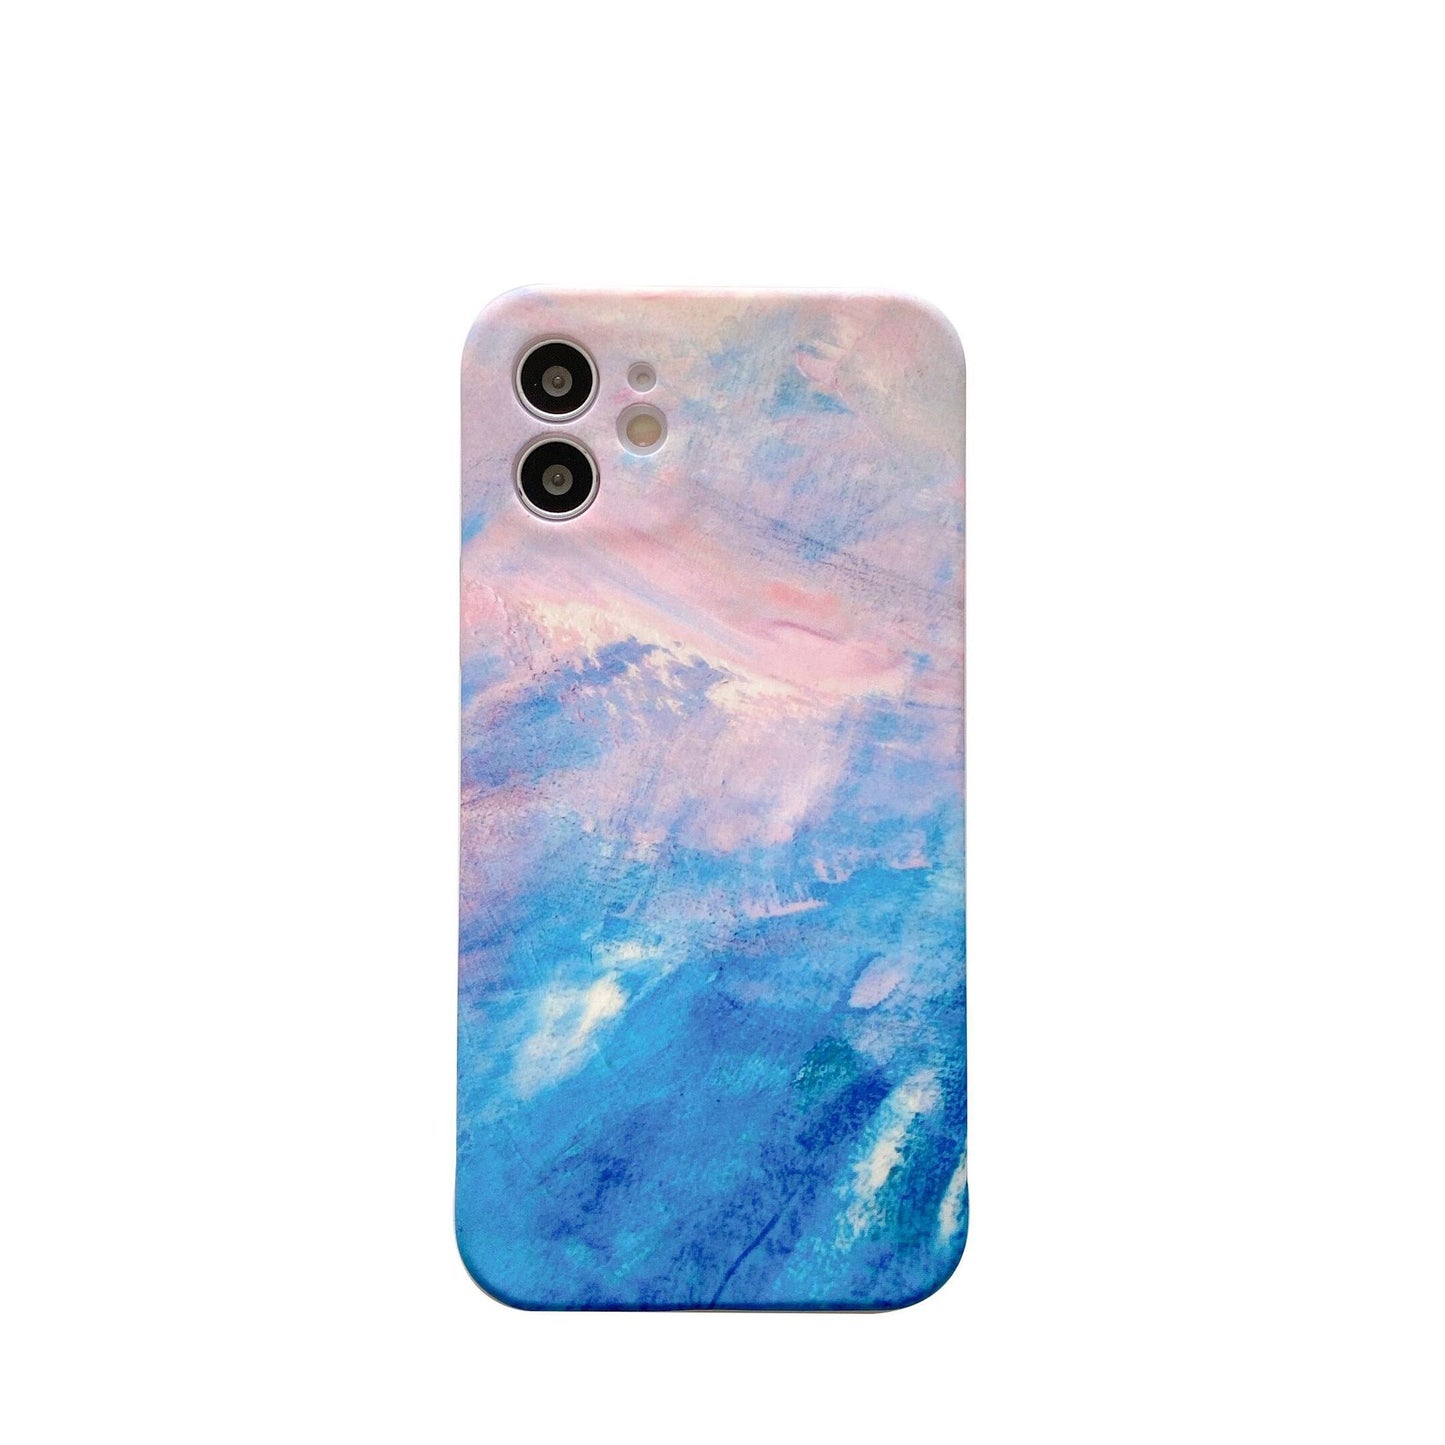 Artistic Graffiti Is Suitable For Mobile Phone Cases